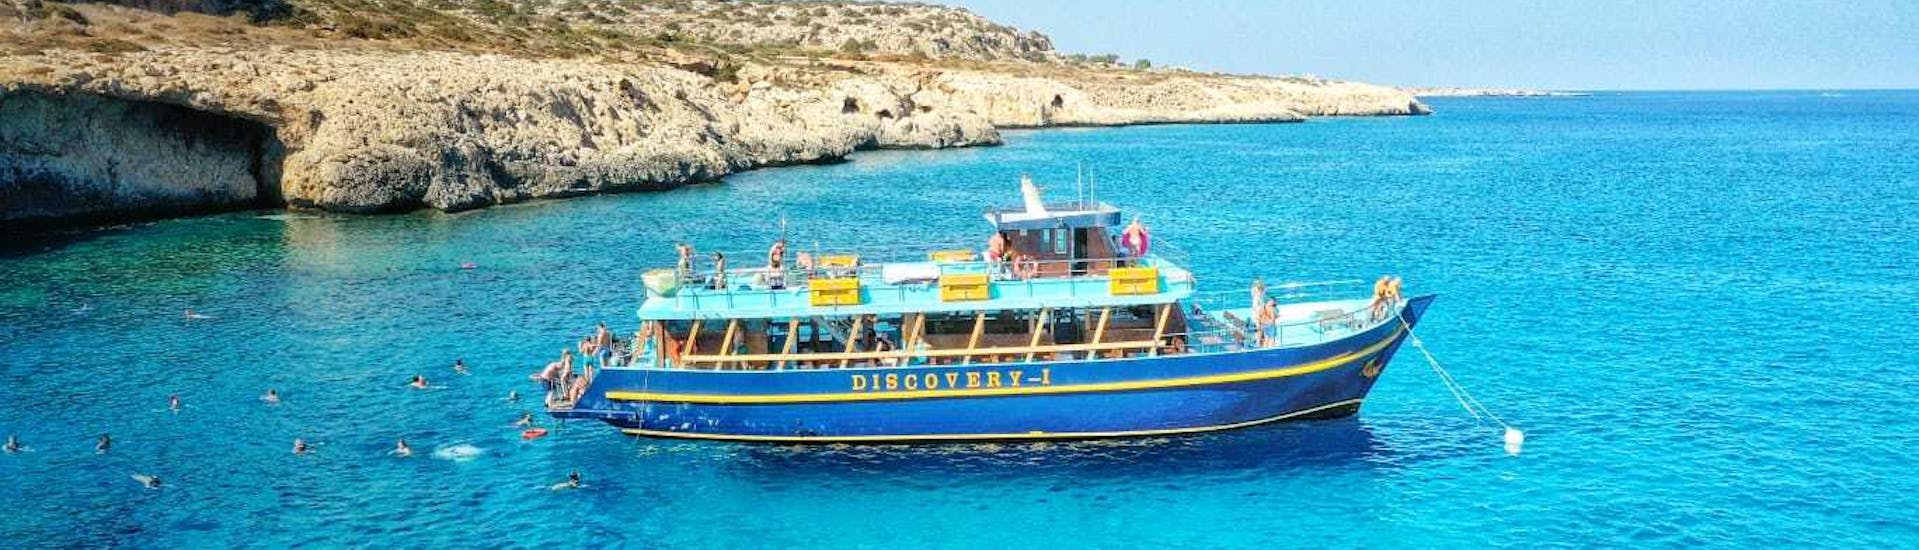 Boat trip to the Blue Lagoon with Discovery Cruises.